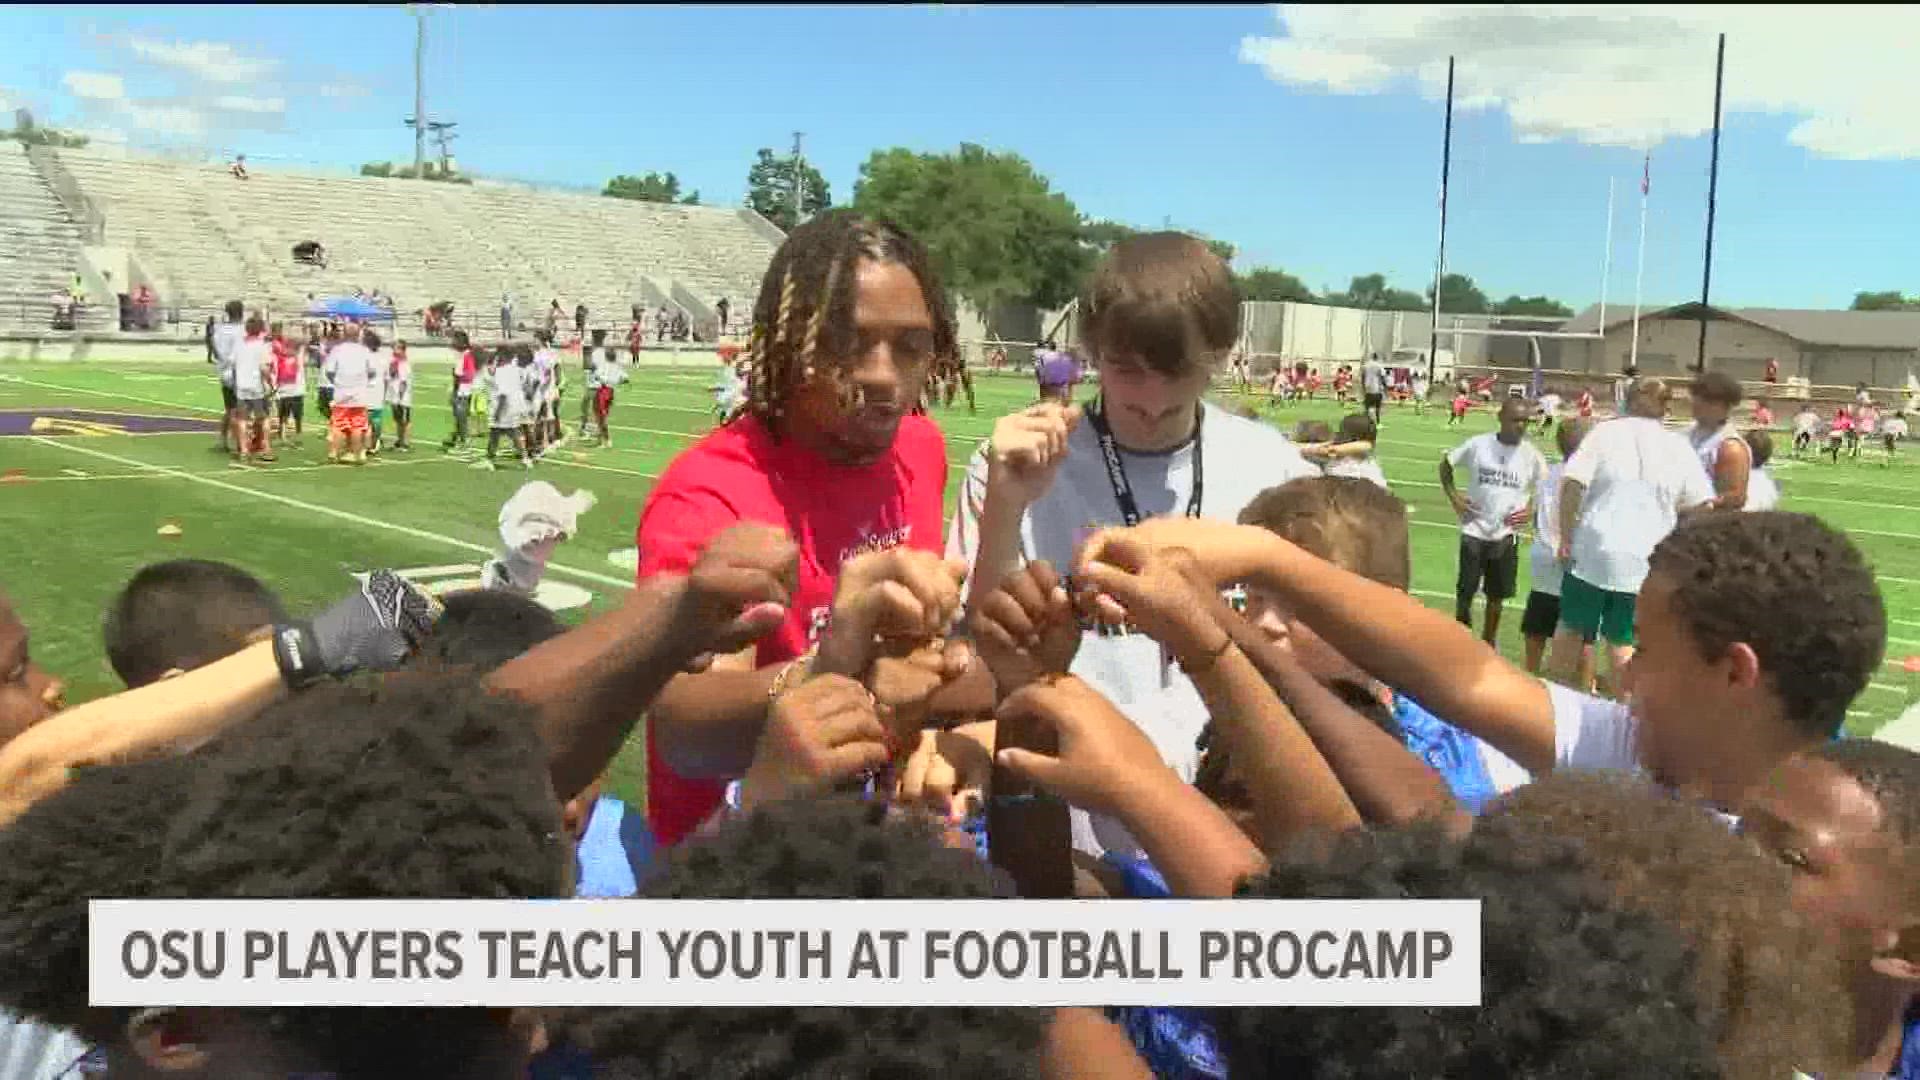 ProCamps and CareSource offered a free youth football camp where Ohio State players served as coaches.